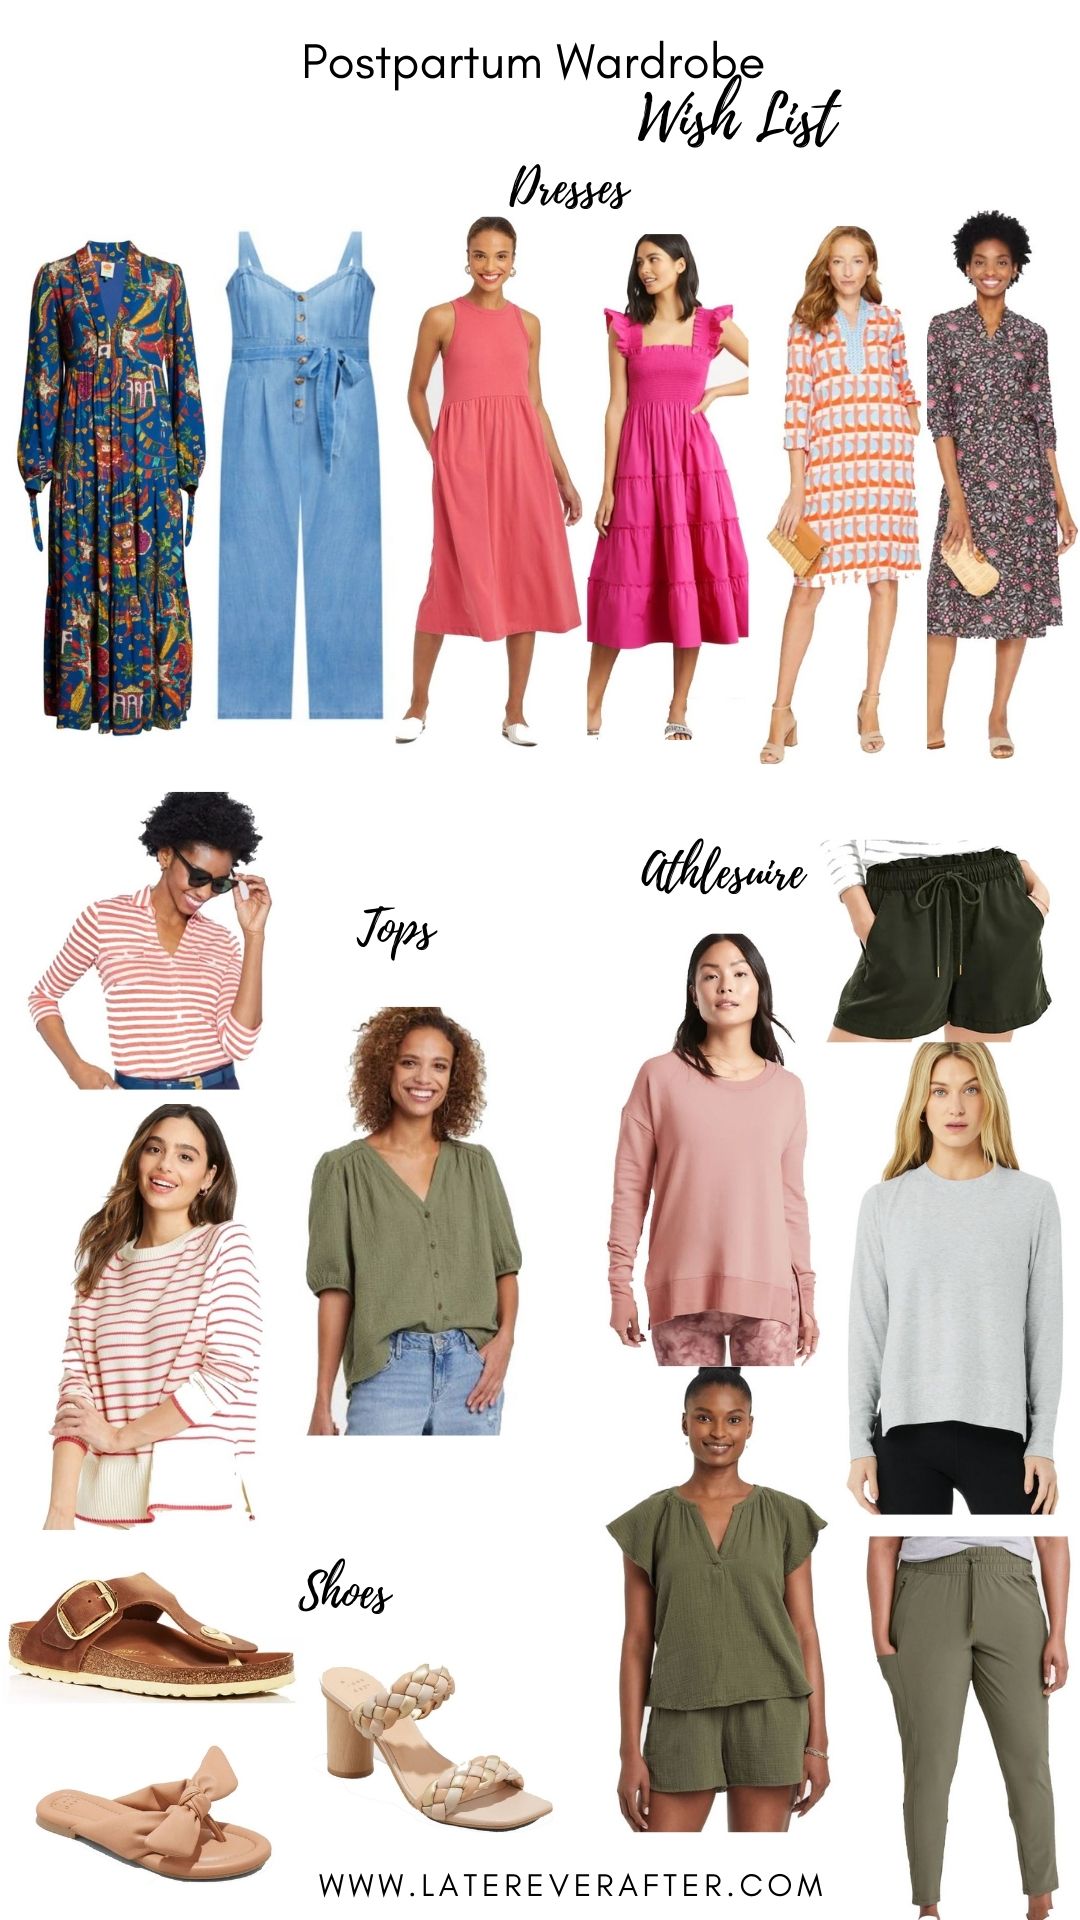 Best & Most Comfortable Postpartum Outfits for New Moms - Daily